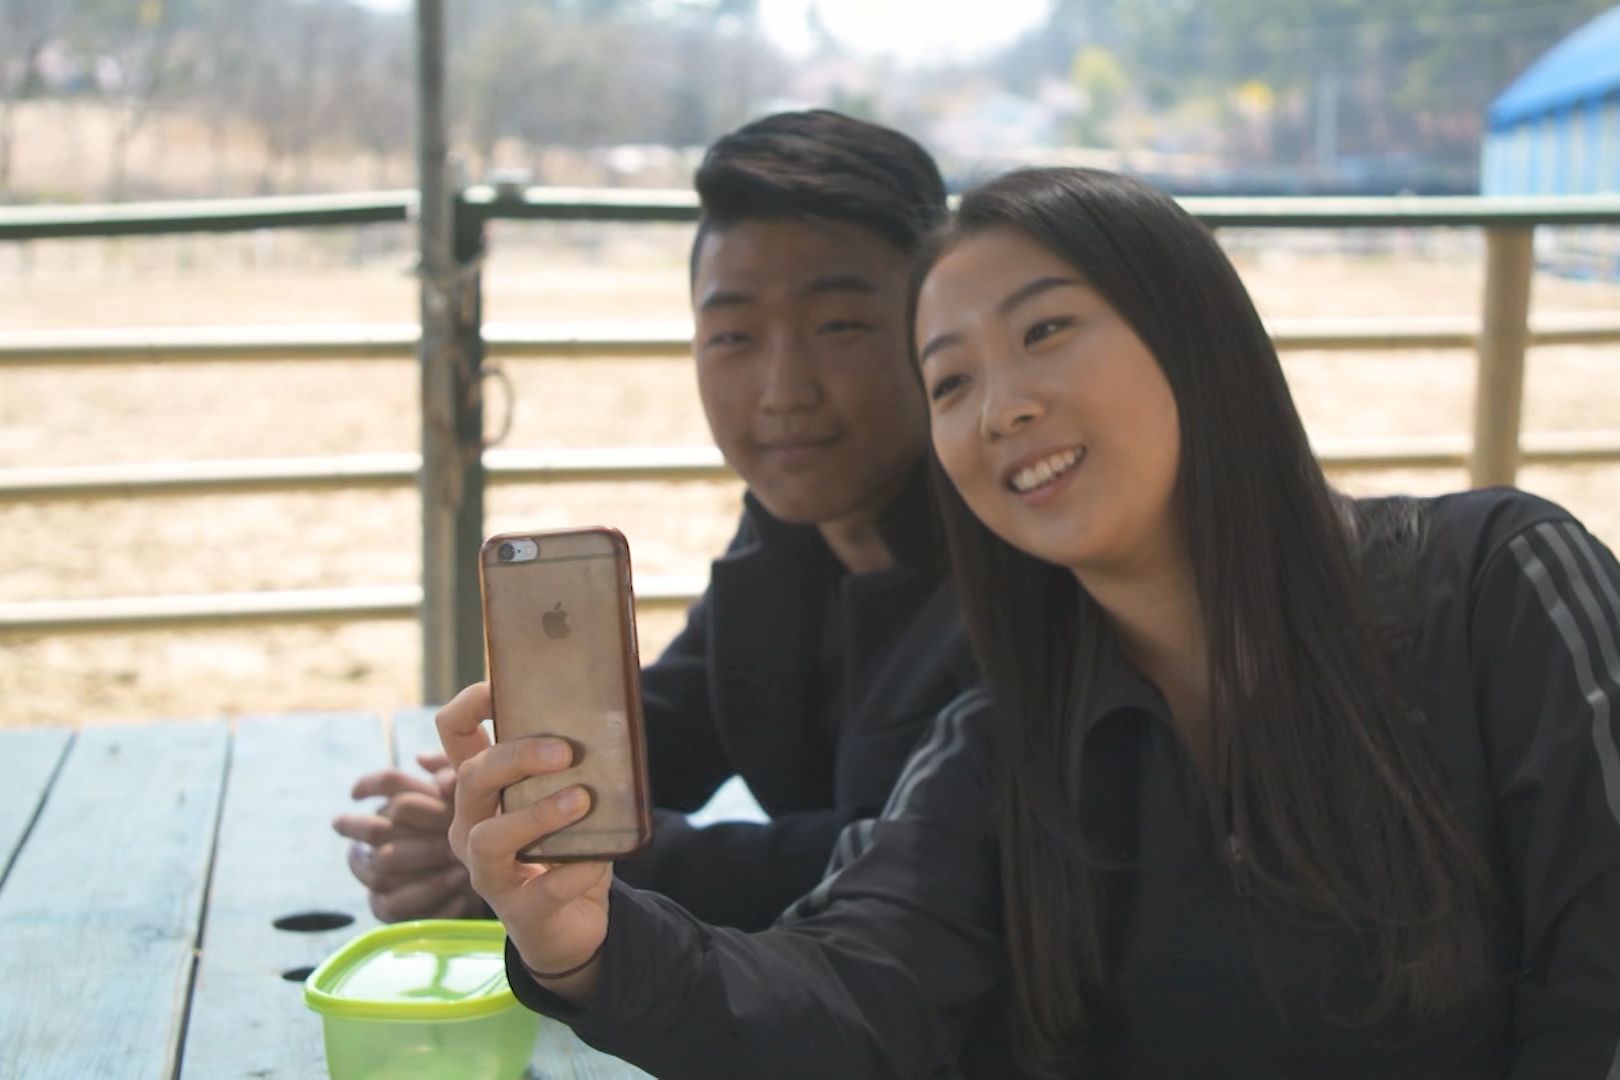 Brezzers Sister Sleep - Why young South Koreans aren't interested in dating | CNN